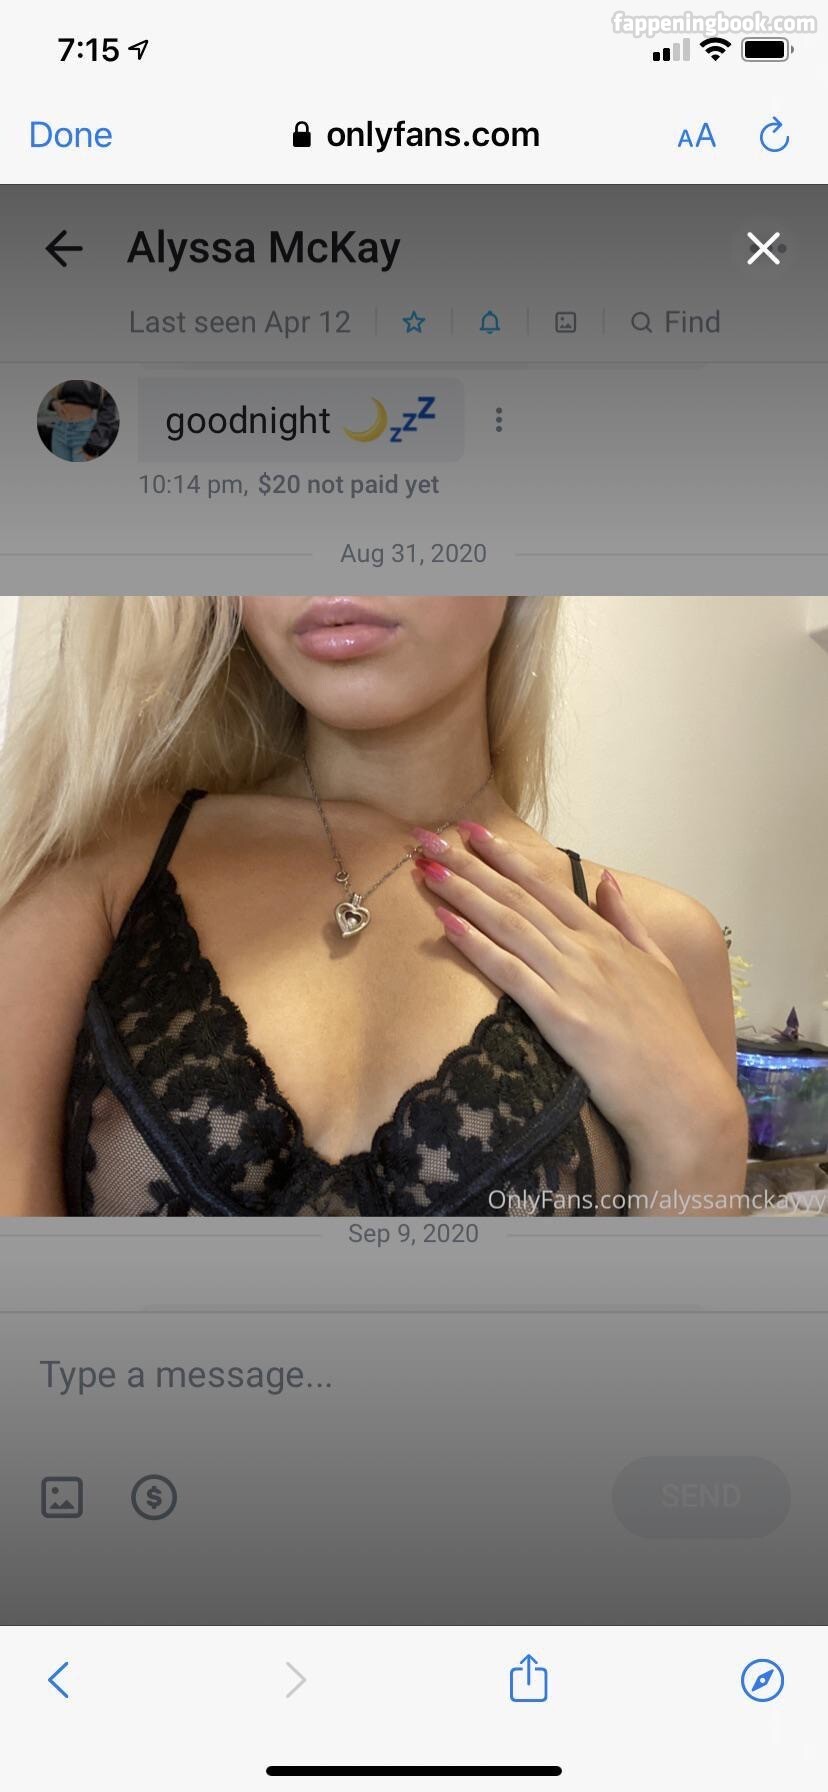 Does alyssa mckay have an onlyfans